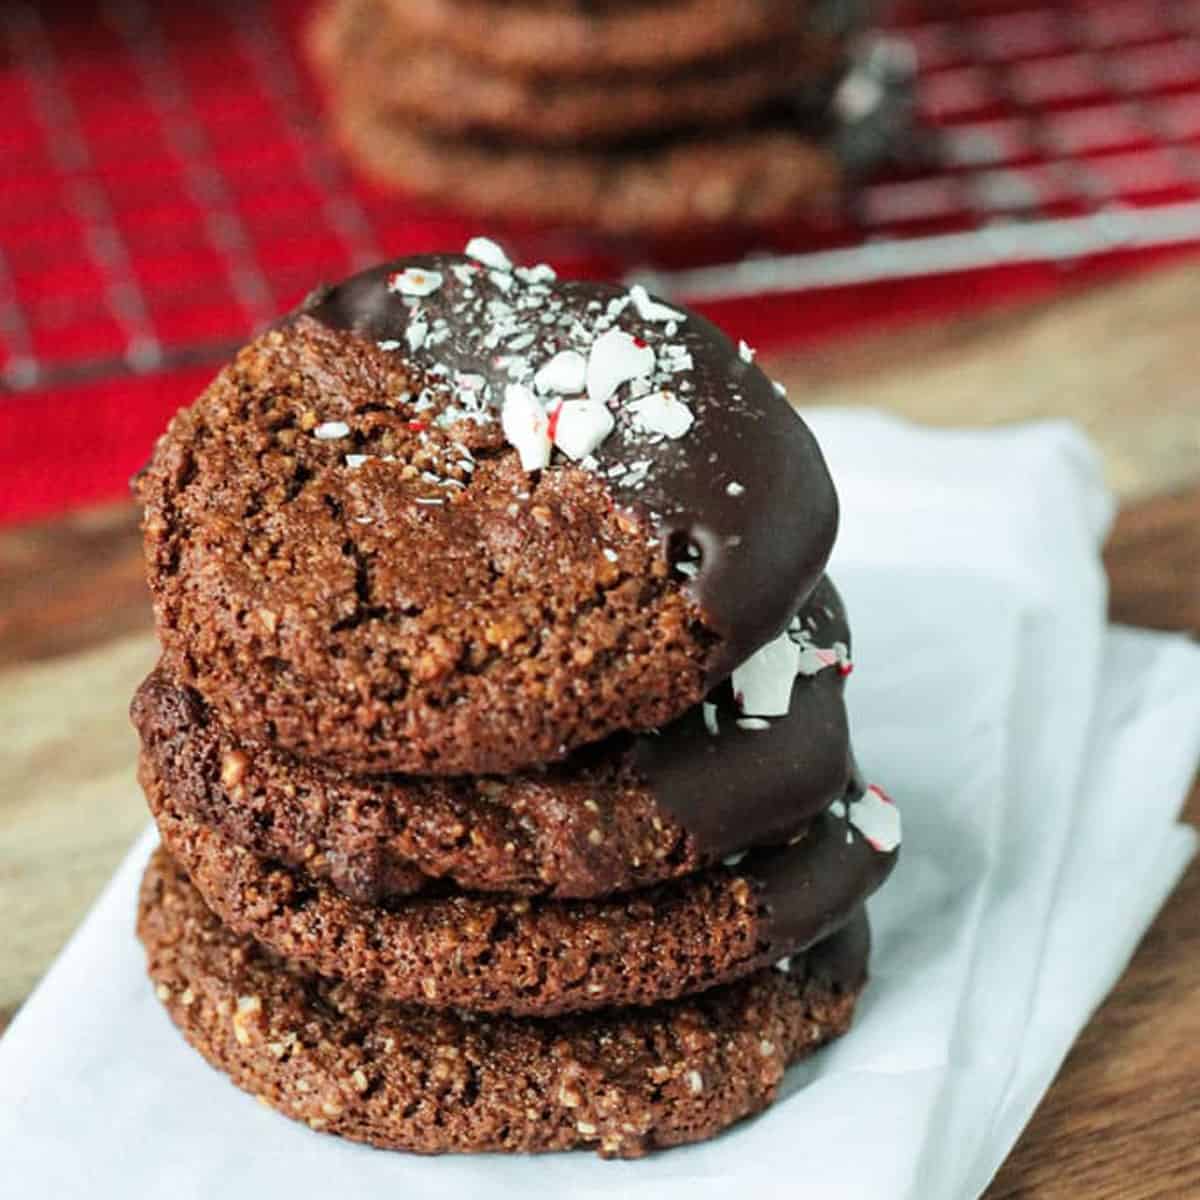 A straight shot of stacked, chewy molasses gingerbread cookies dipped in chocolate and topped with crashed peppermint candies.